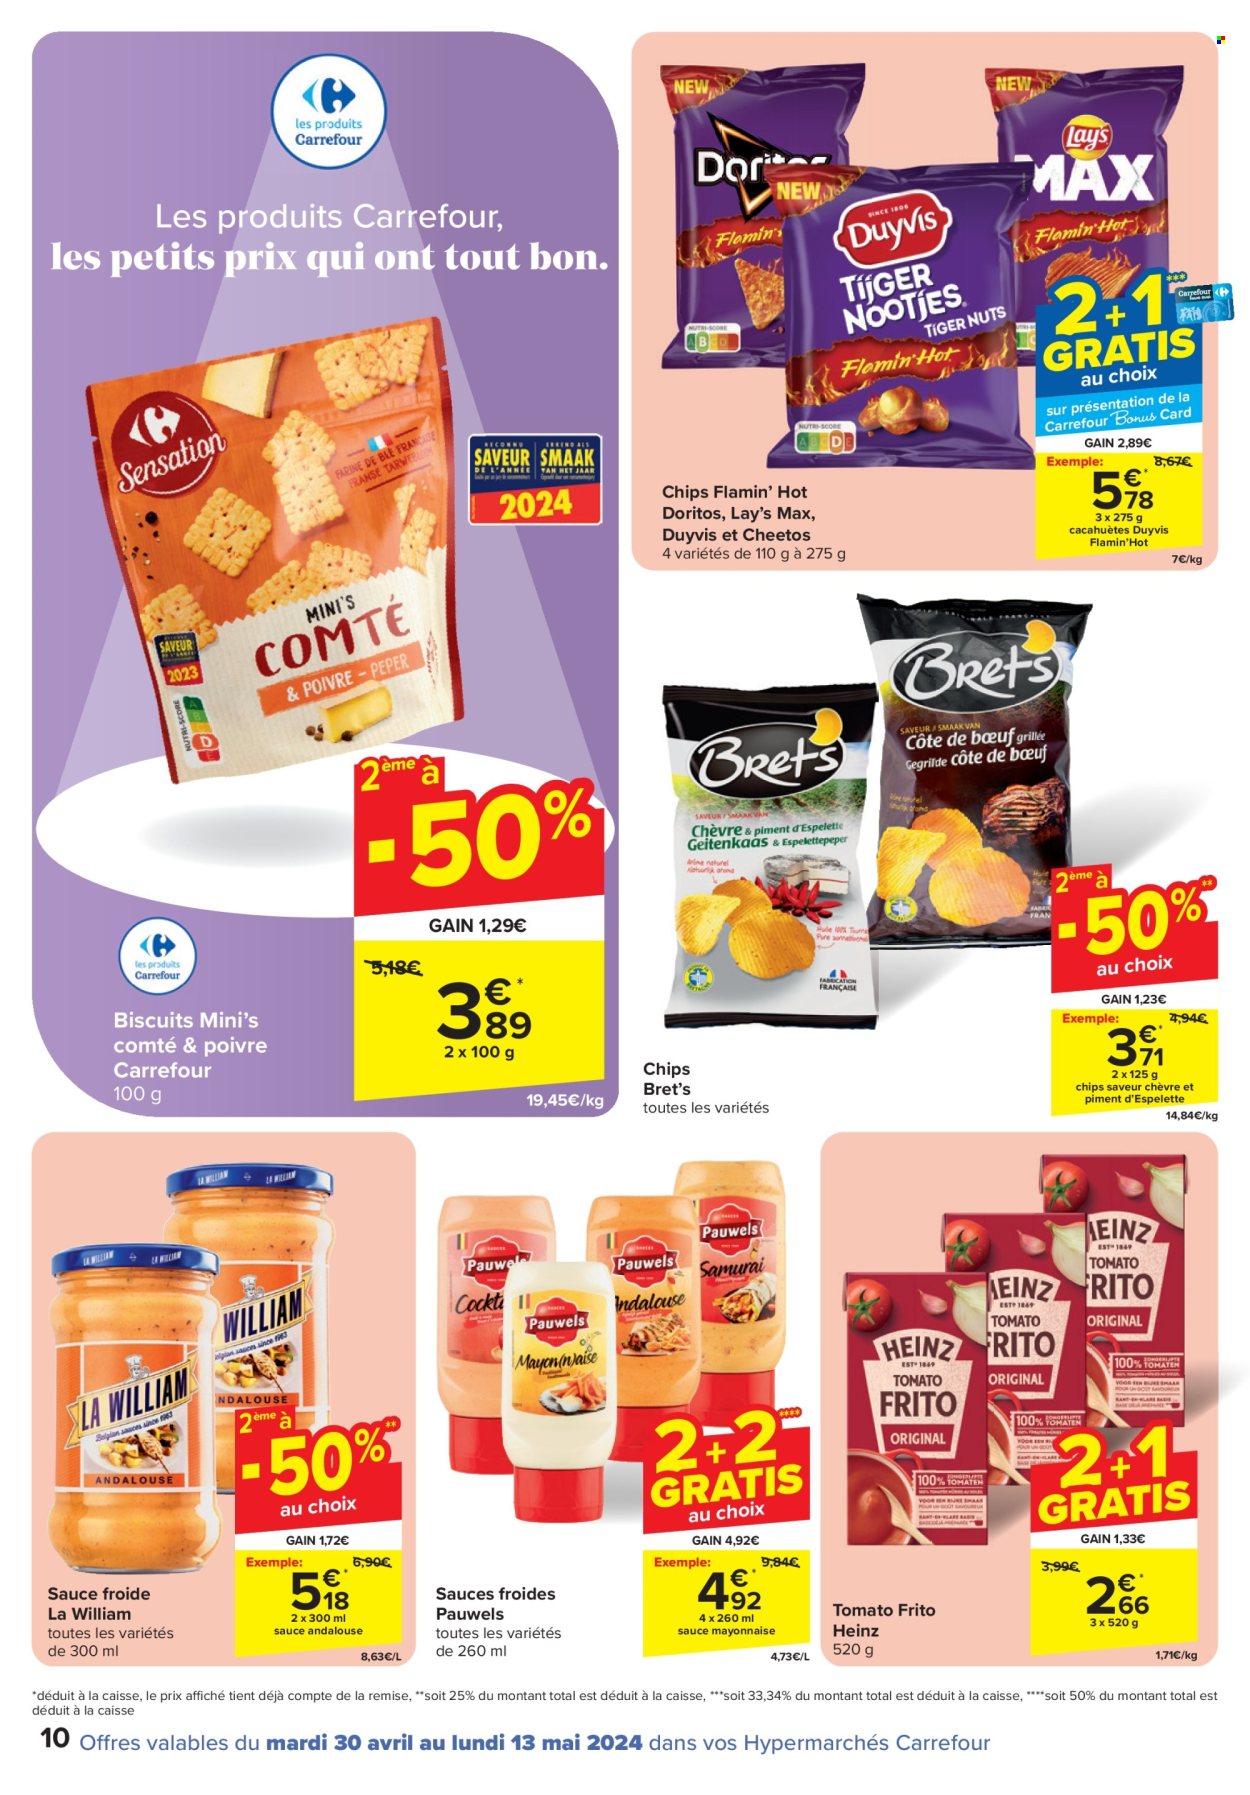 thumbnail - Carrefour hypermarkt-aanbieding - 30/04/2024 - 13/05/2024 -  producten in de aanbieding - Chèvre, cheetos, chips, zoute snack, Lay’s, Heinz, tomato frito. Pagina 10.